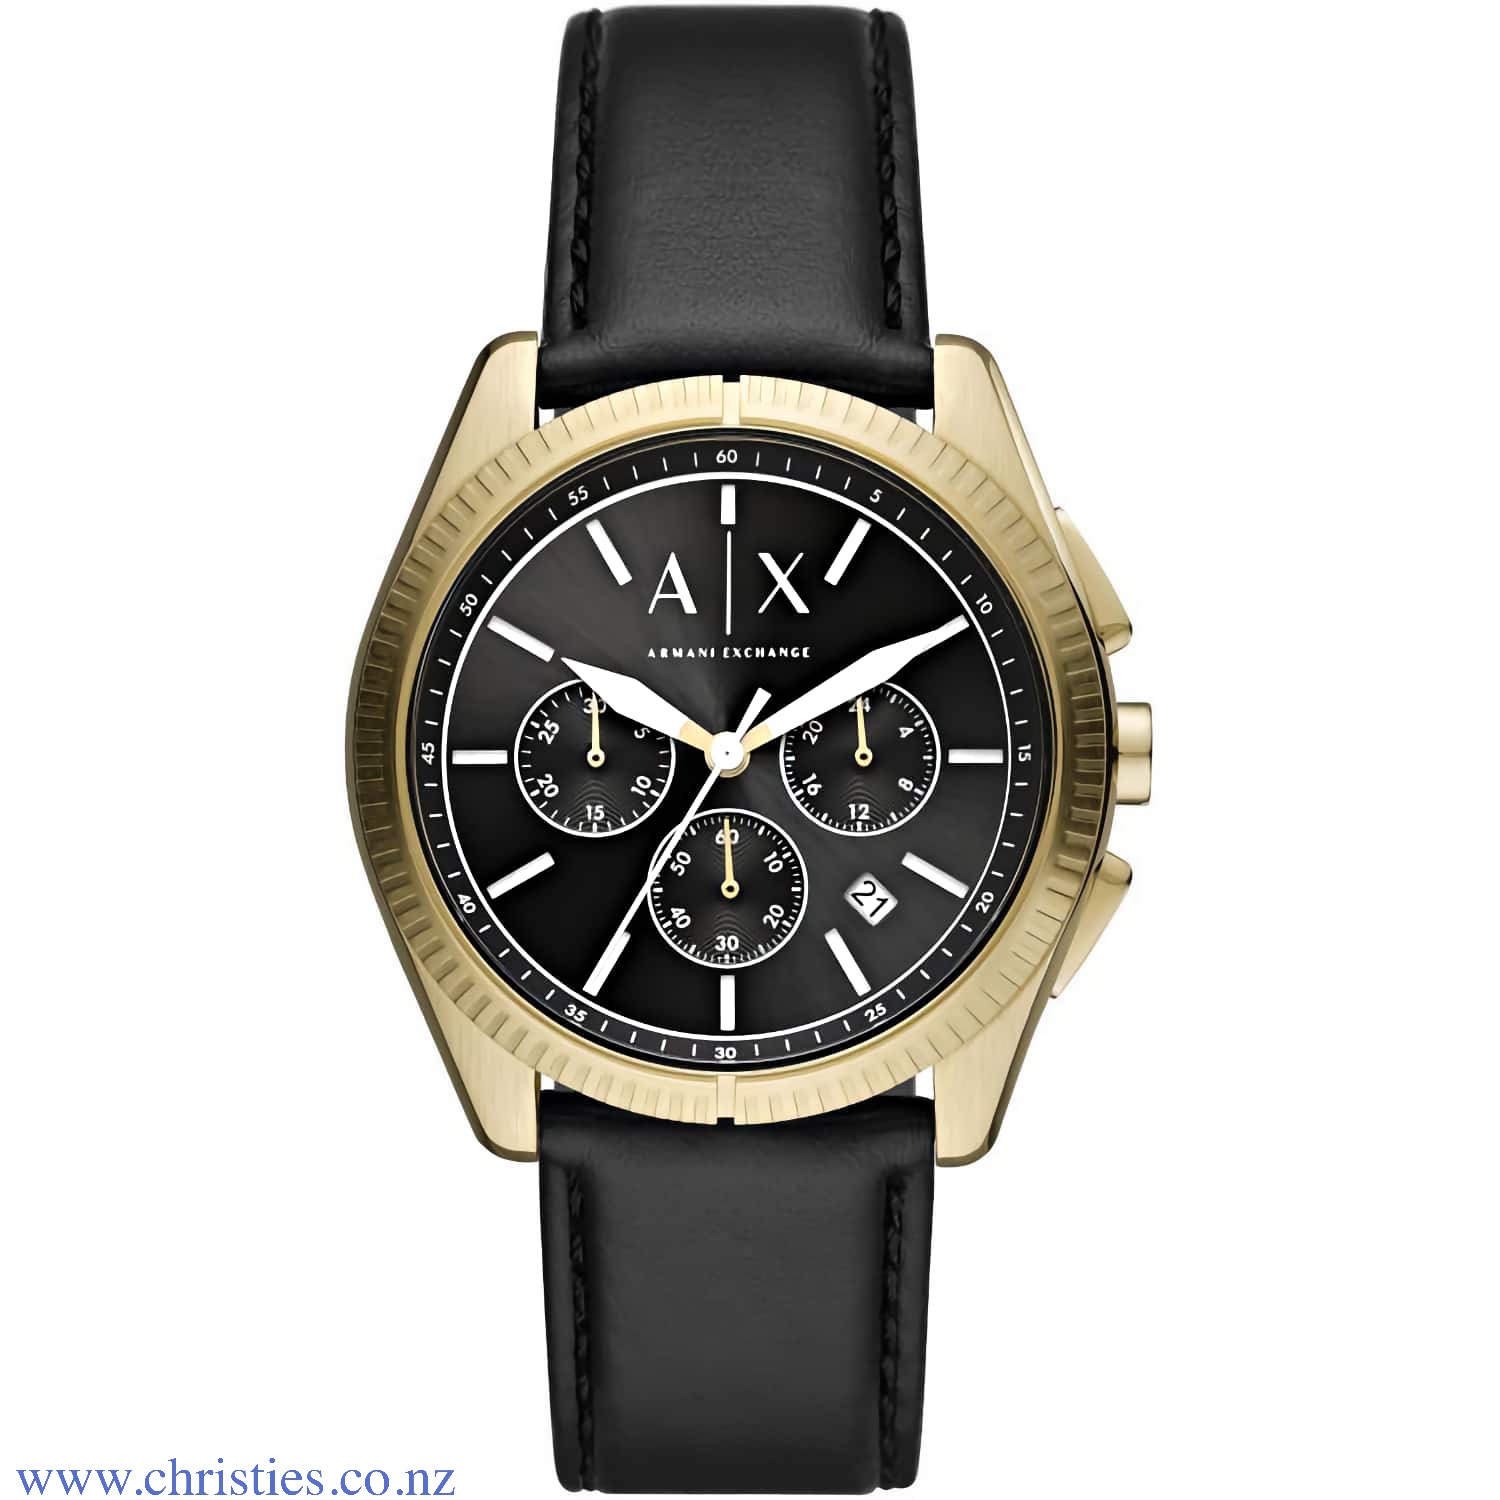 AX2854 A|X Armani Exchange Giacomo Watch. AX2854 A|X Armani Exchange Giacomo Watch LAYBUY - Pay it easy, in 6 weekly payments and have it now. Only pay the price of your purchase, when you pay your instalments on time. A late fee may be applied for mis em